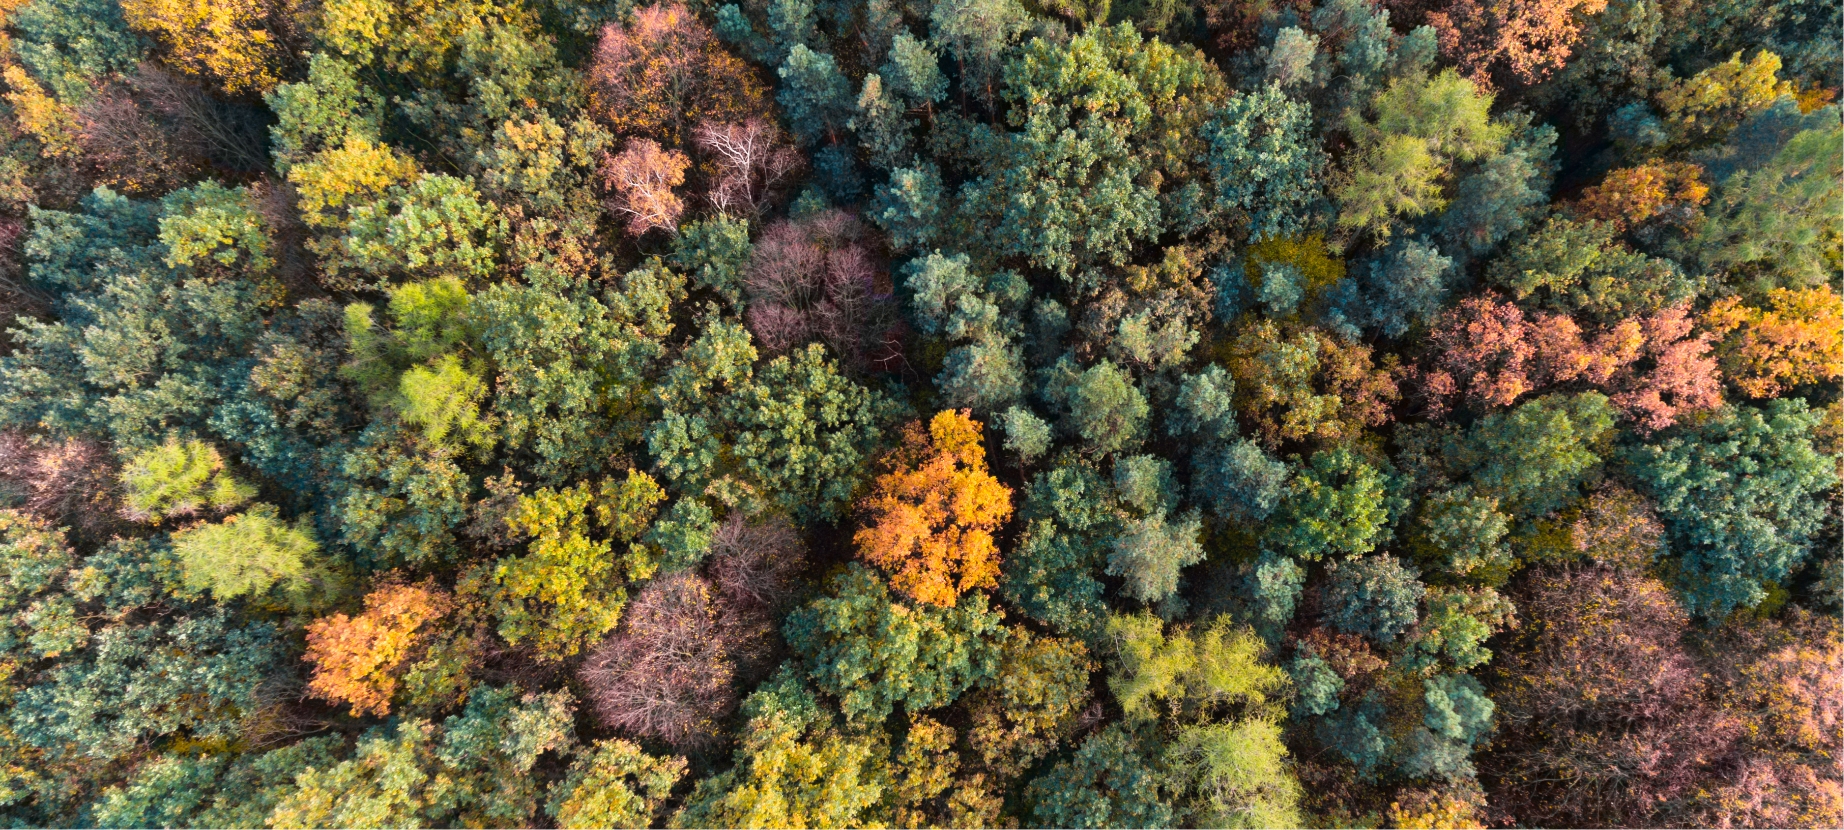 An overhead perspective of a densely wooded area